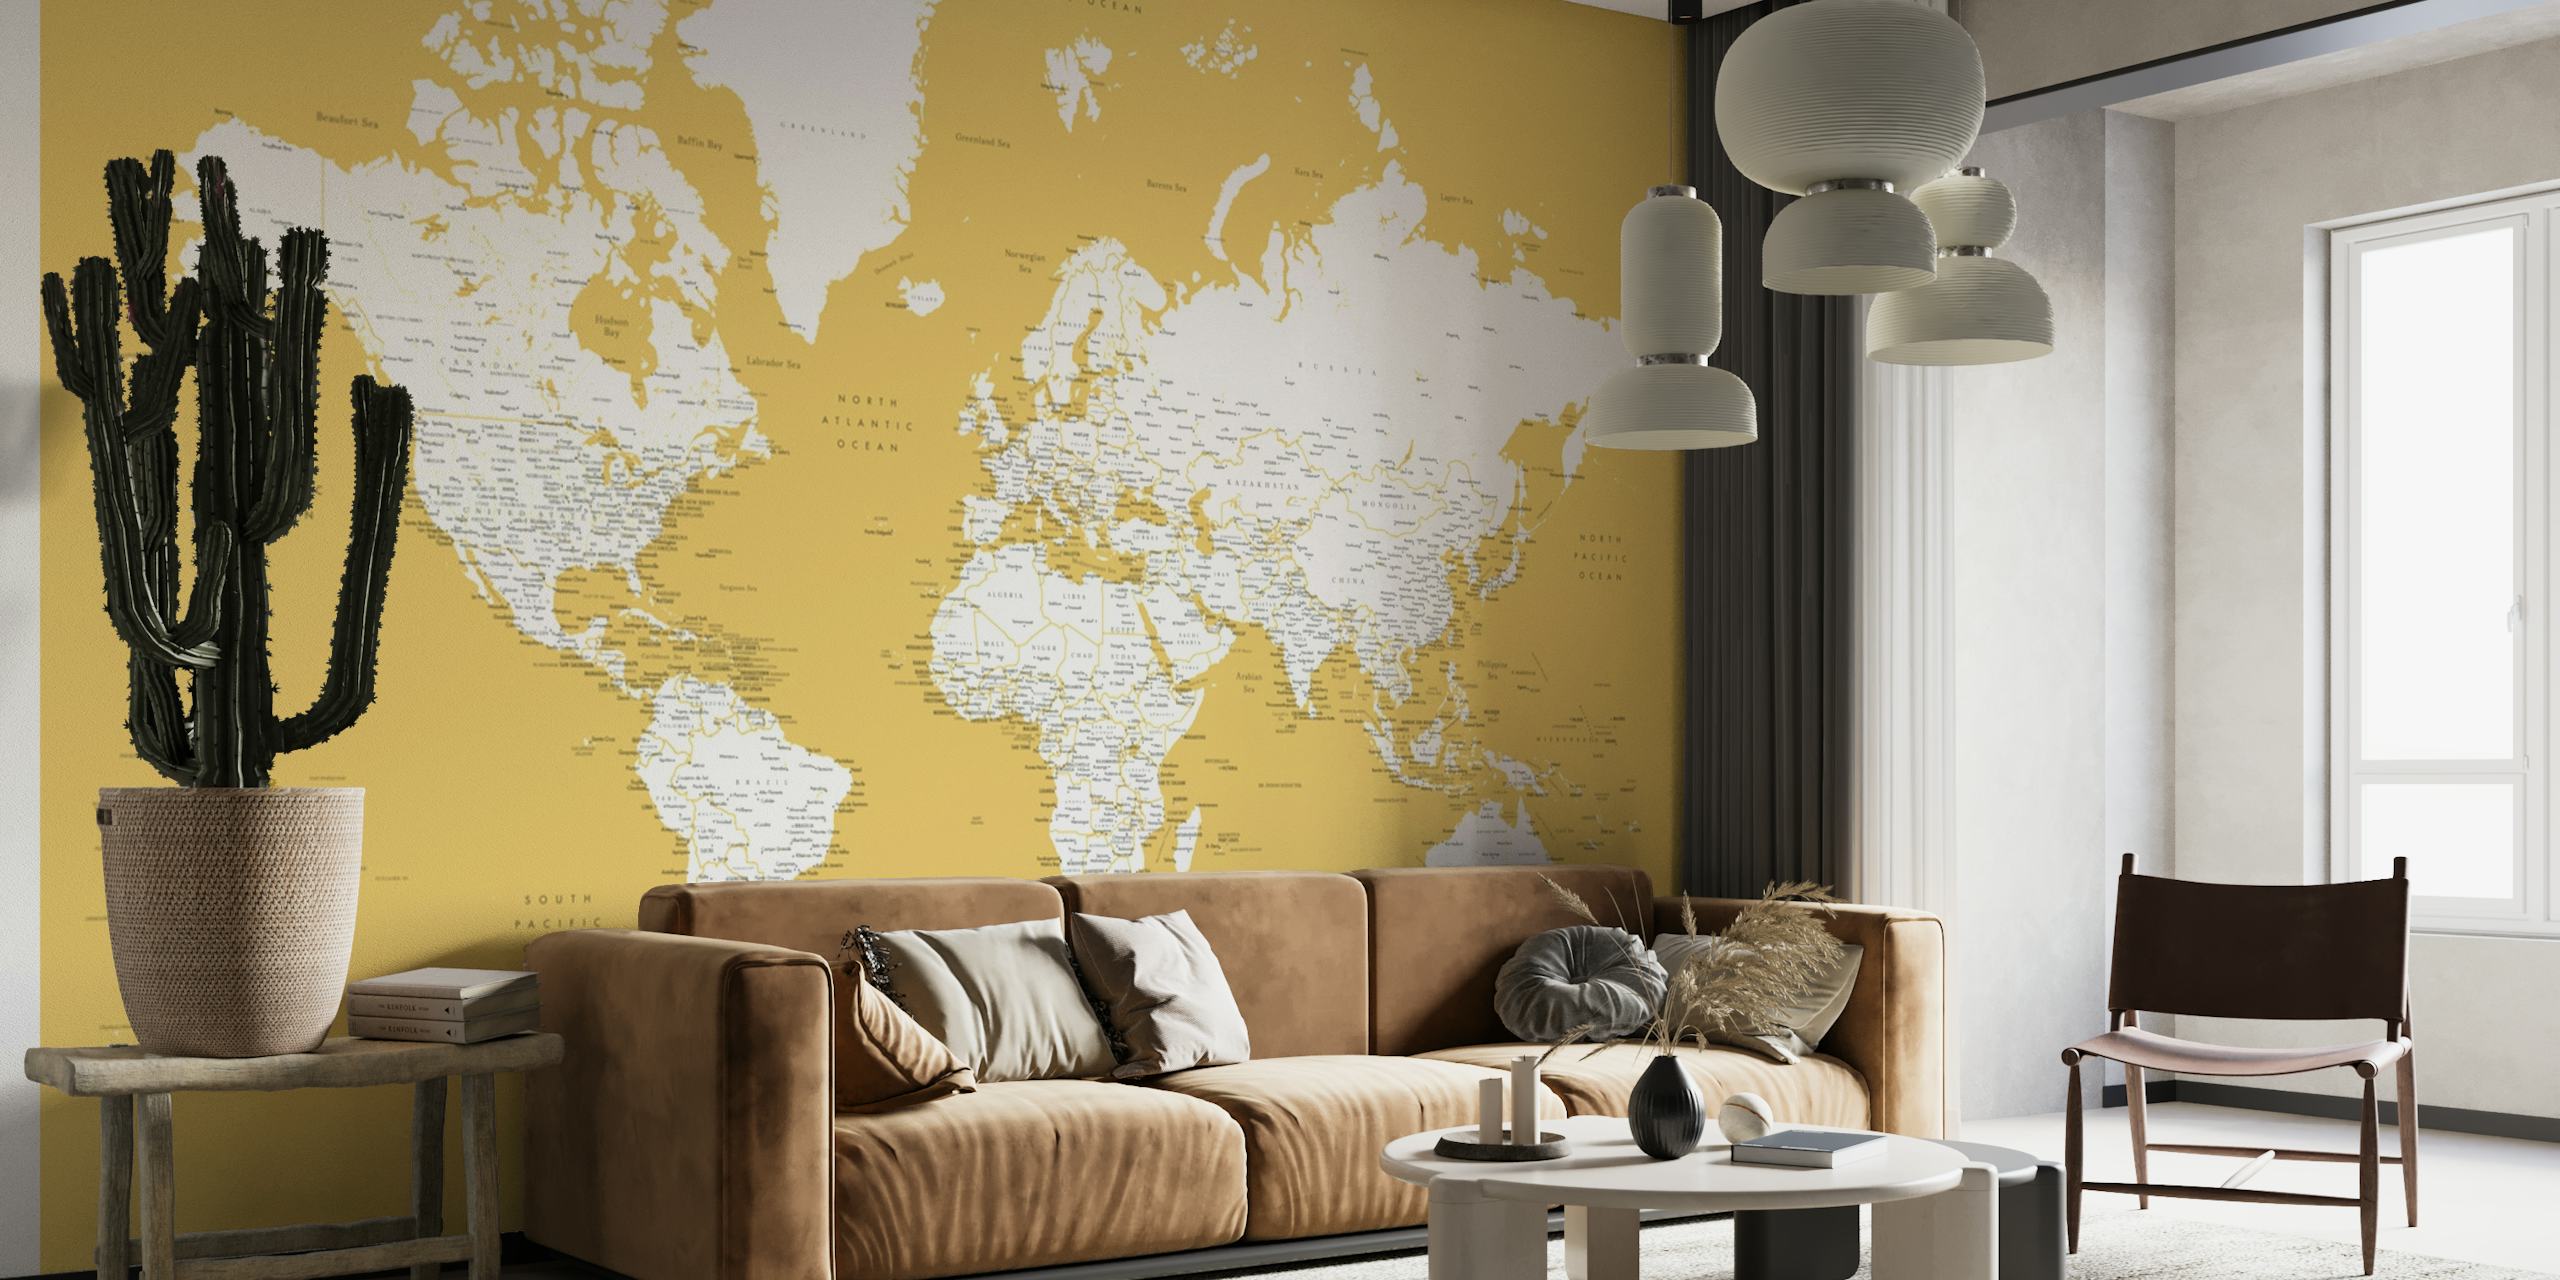 Detailed world map Andrew papel pintado